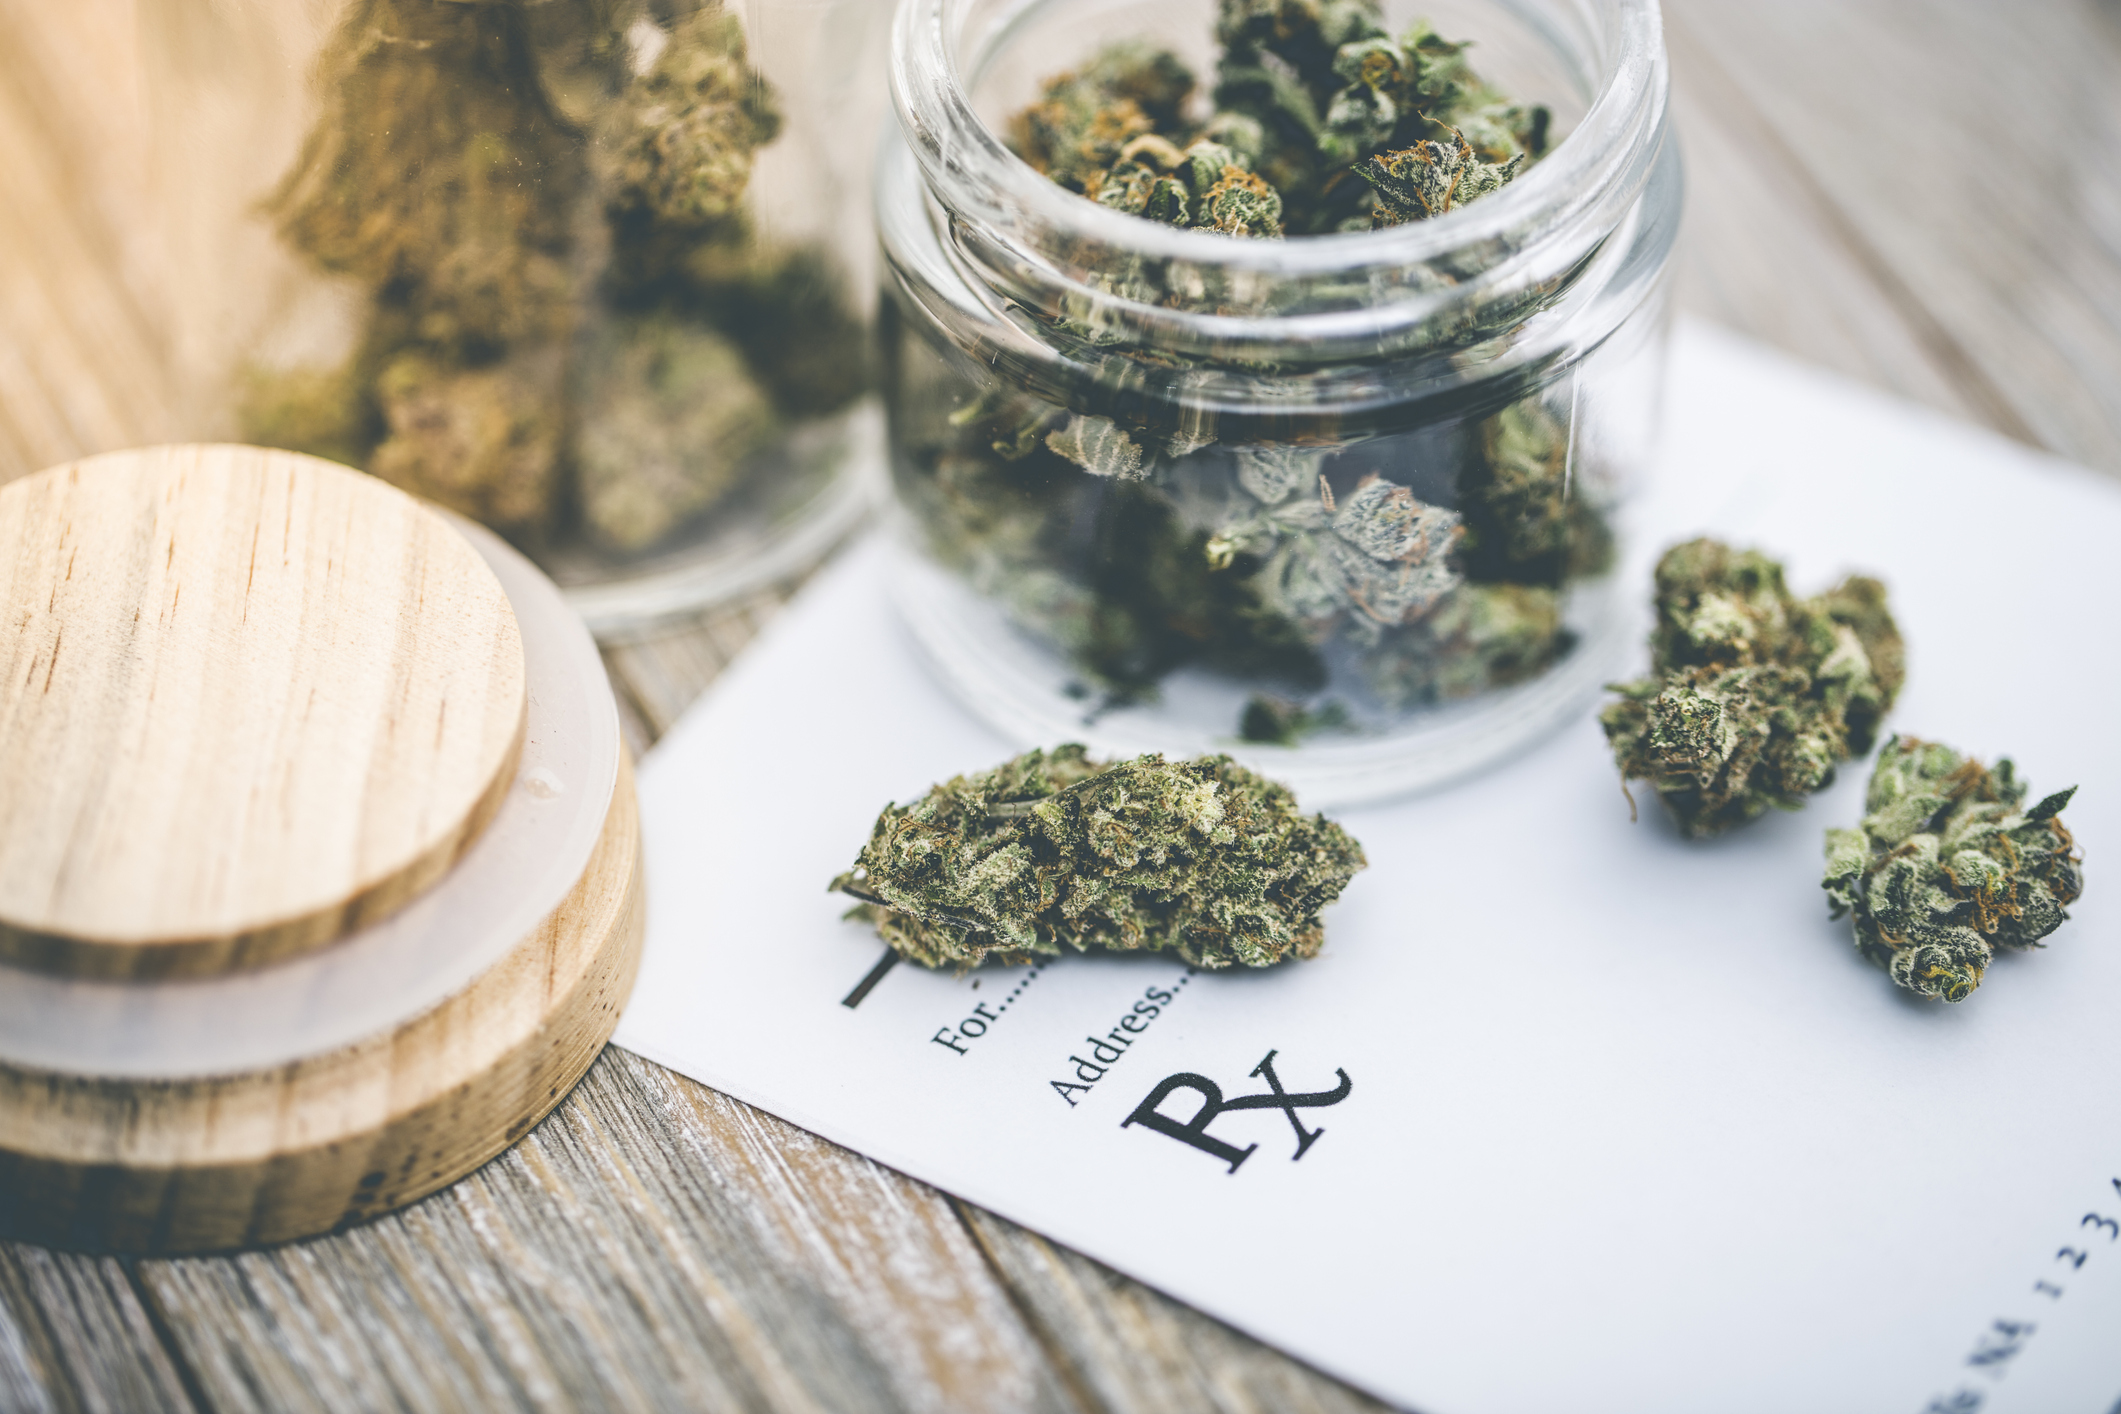 Expanding Medical Marijuana Treatment in Ohio: State Medical Board Seeks "Consensus" on Adding New Qualifying Conditions  Thumbnail